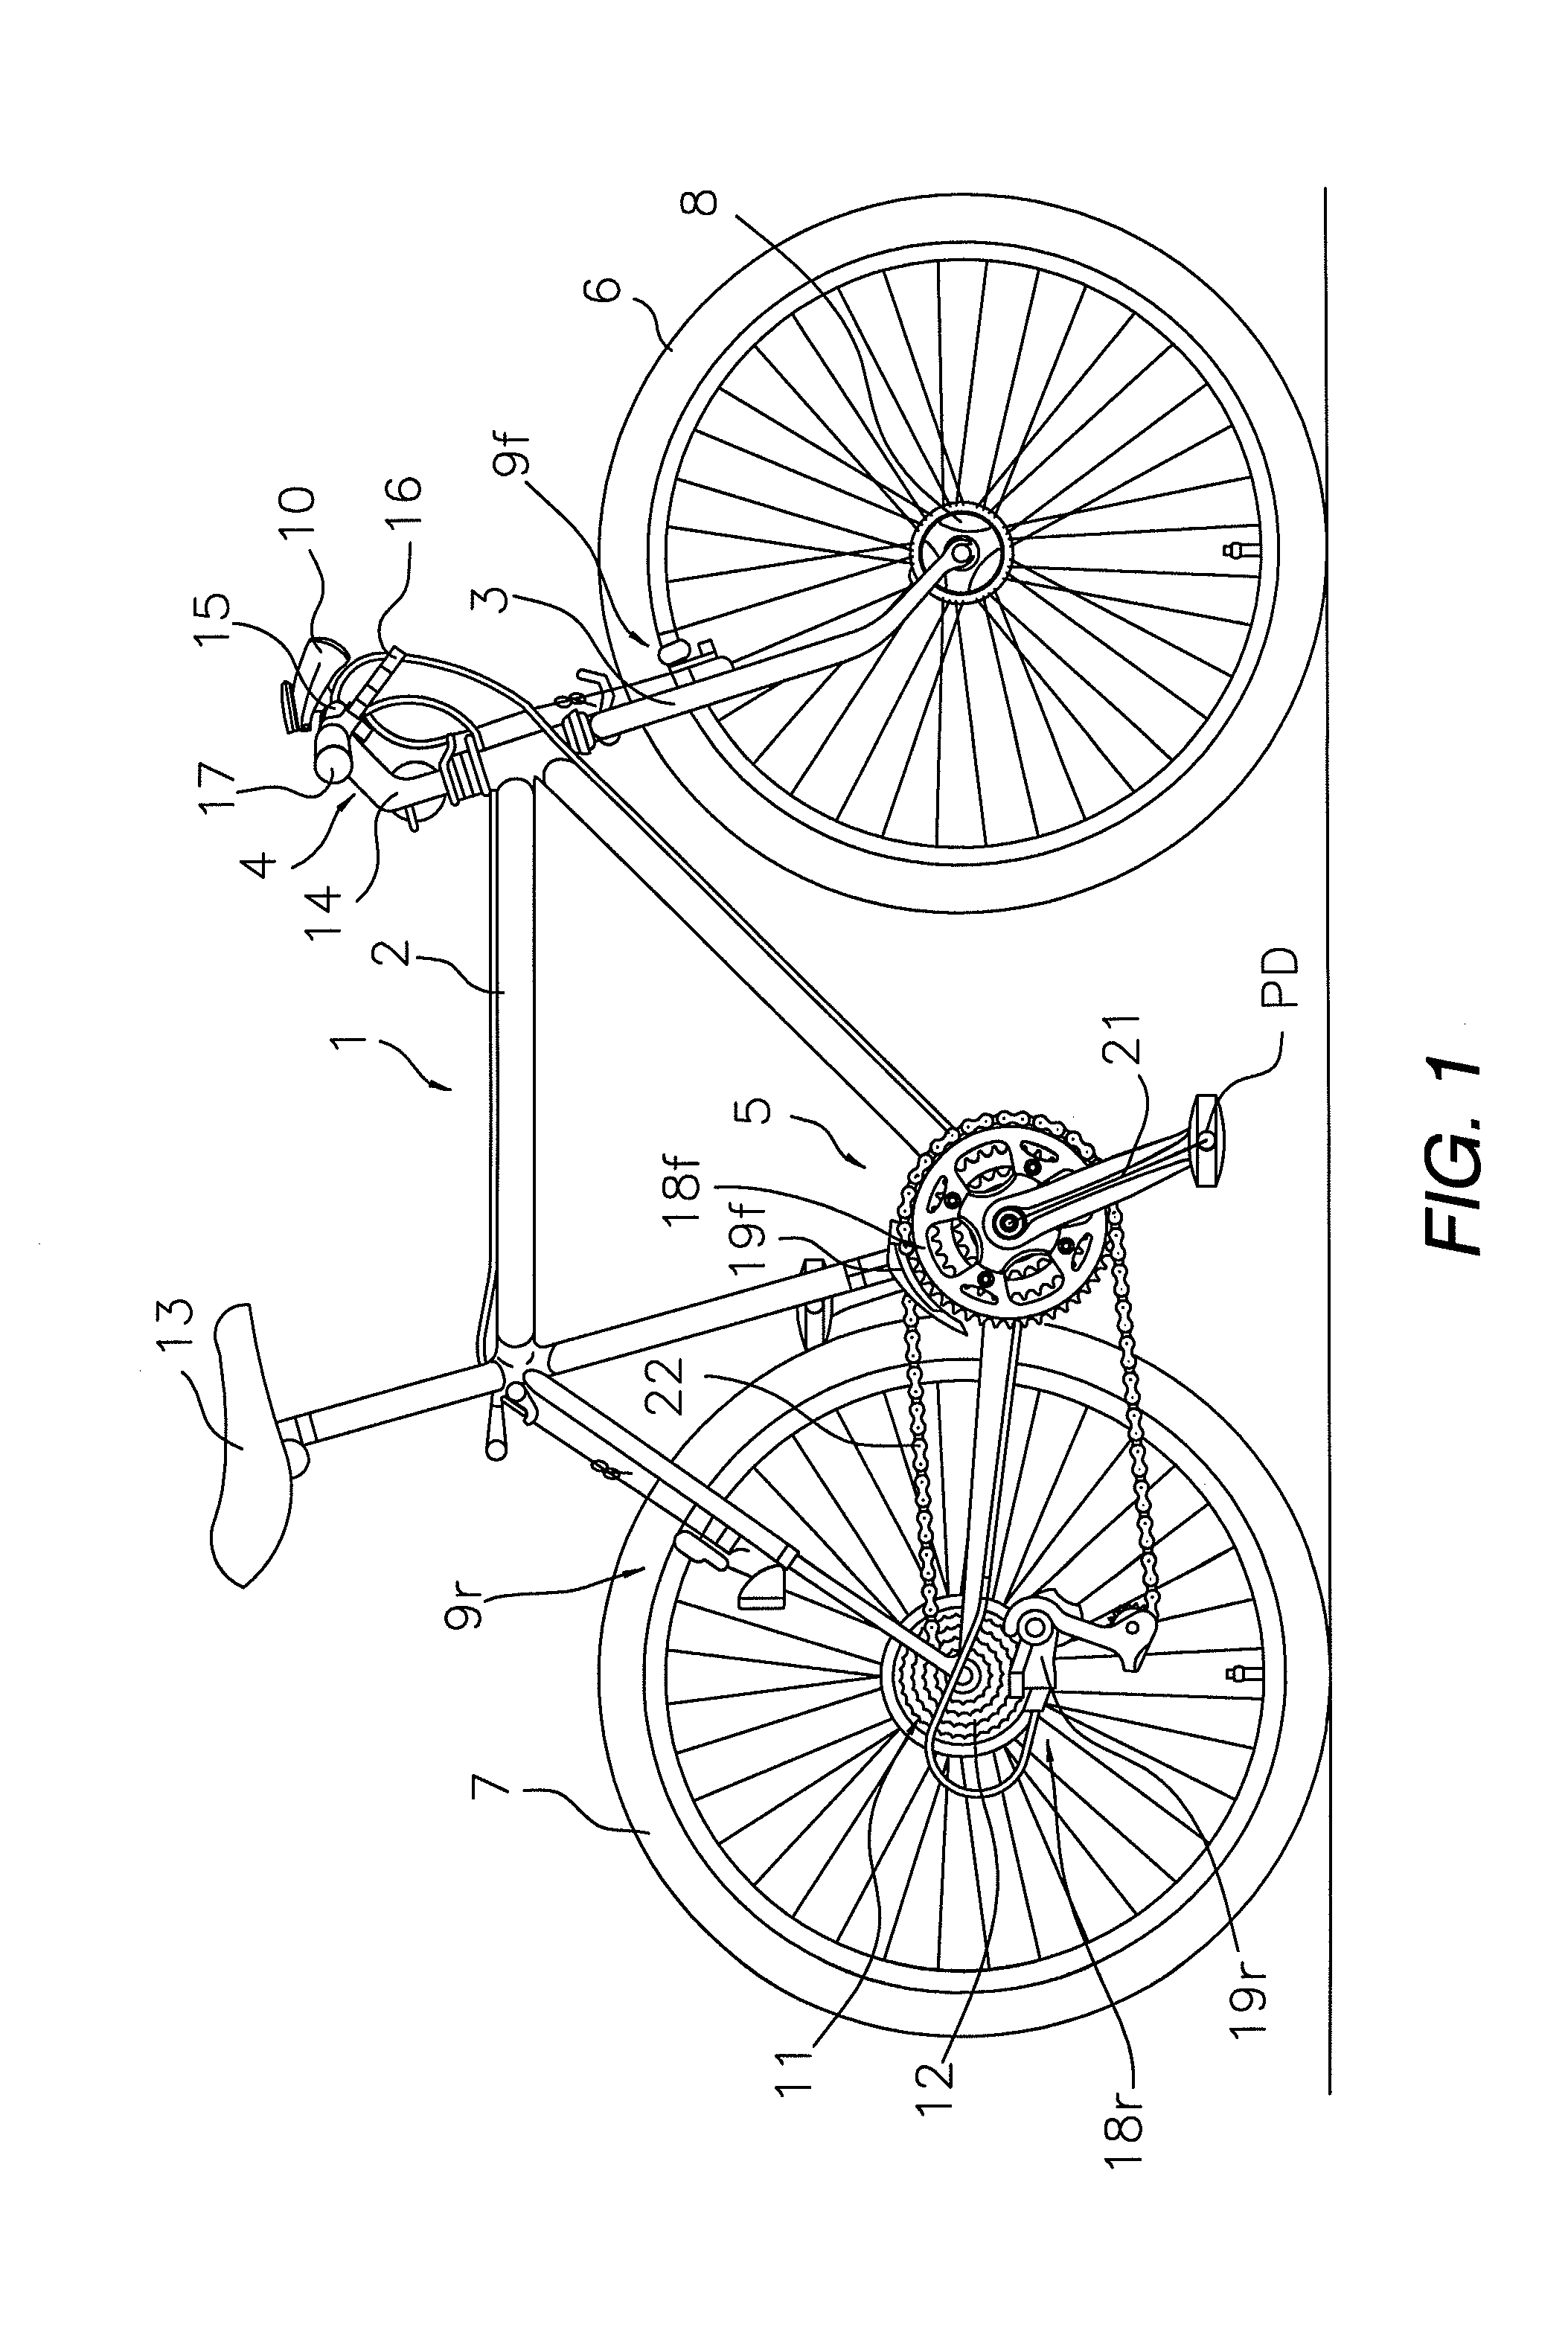 Torsion detecting sleeve member and torque-detecting device